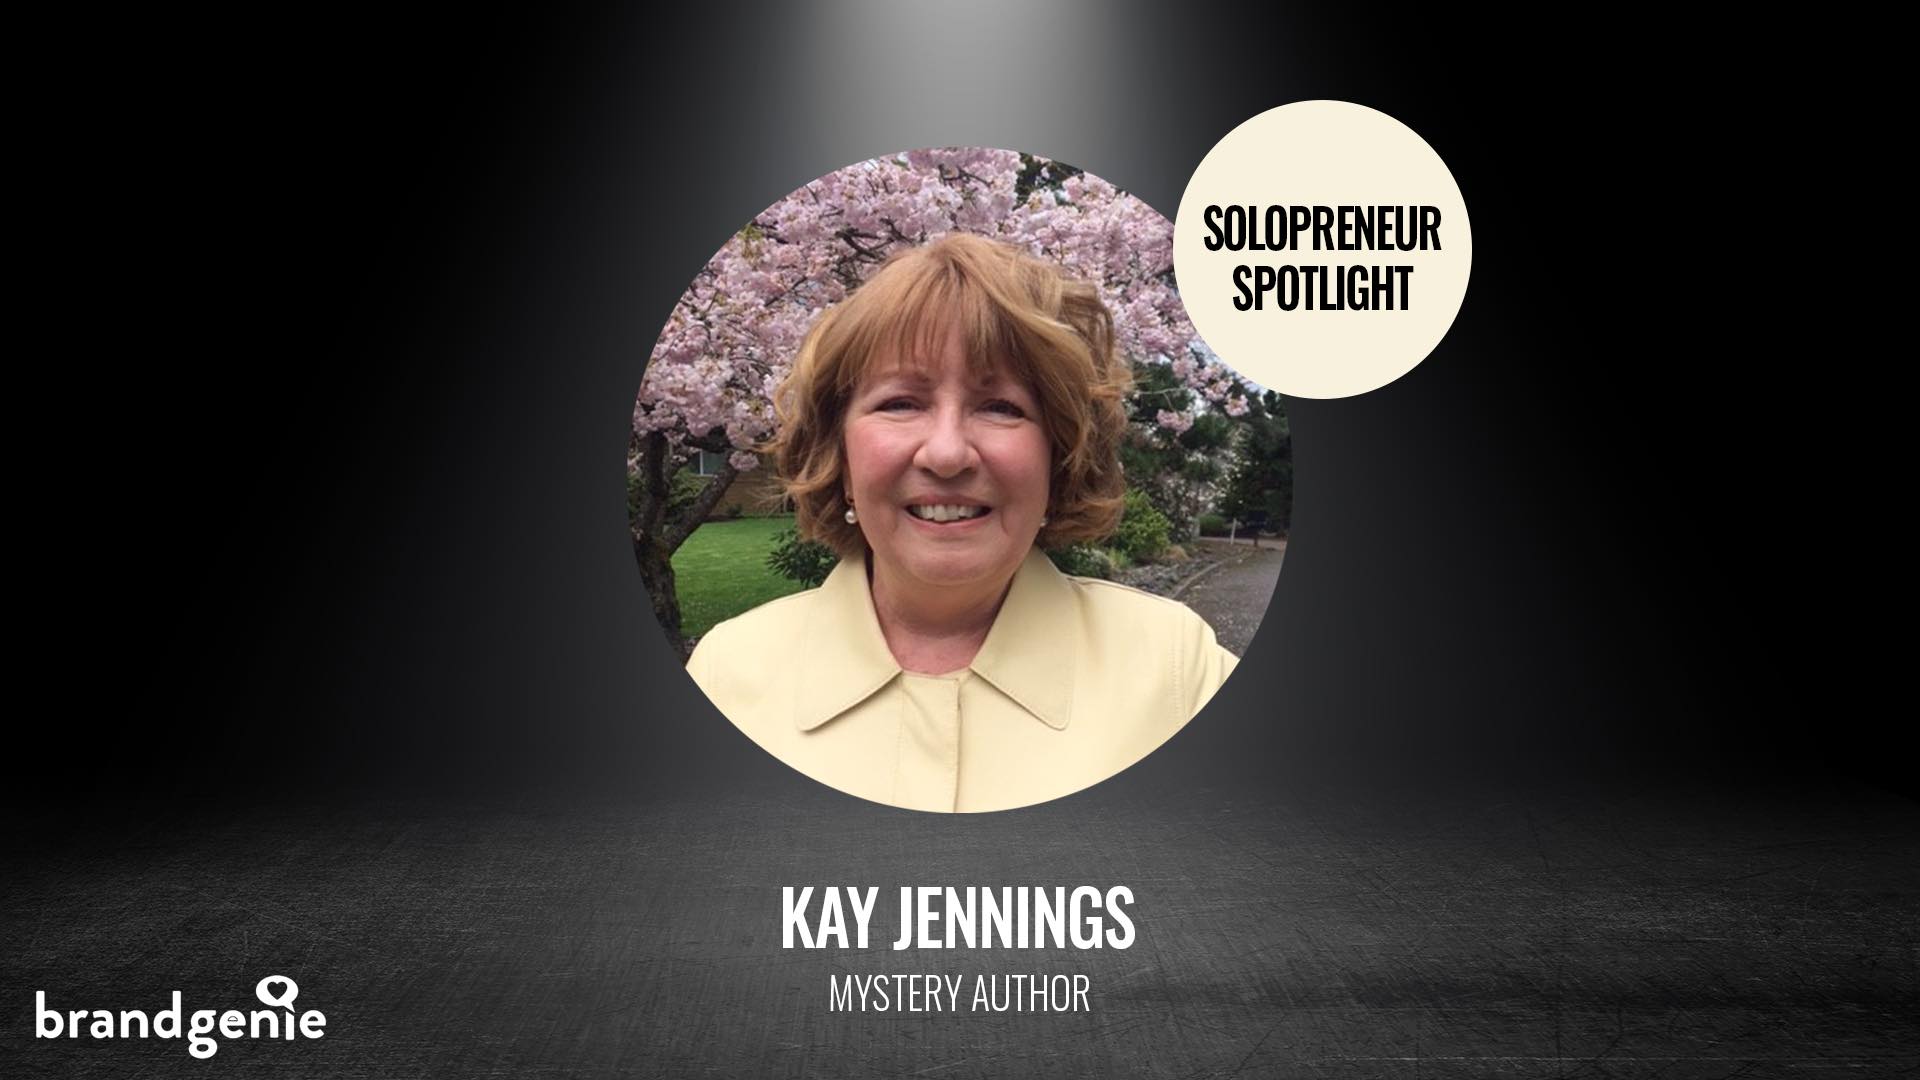 Author Kay Jennings shares her journey to publishing her first novel, tips for writers, and why having a compelling website is so important for an author.